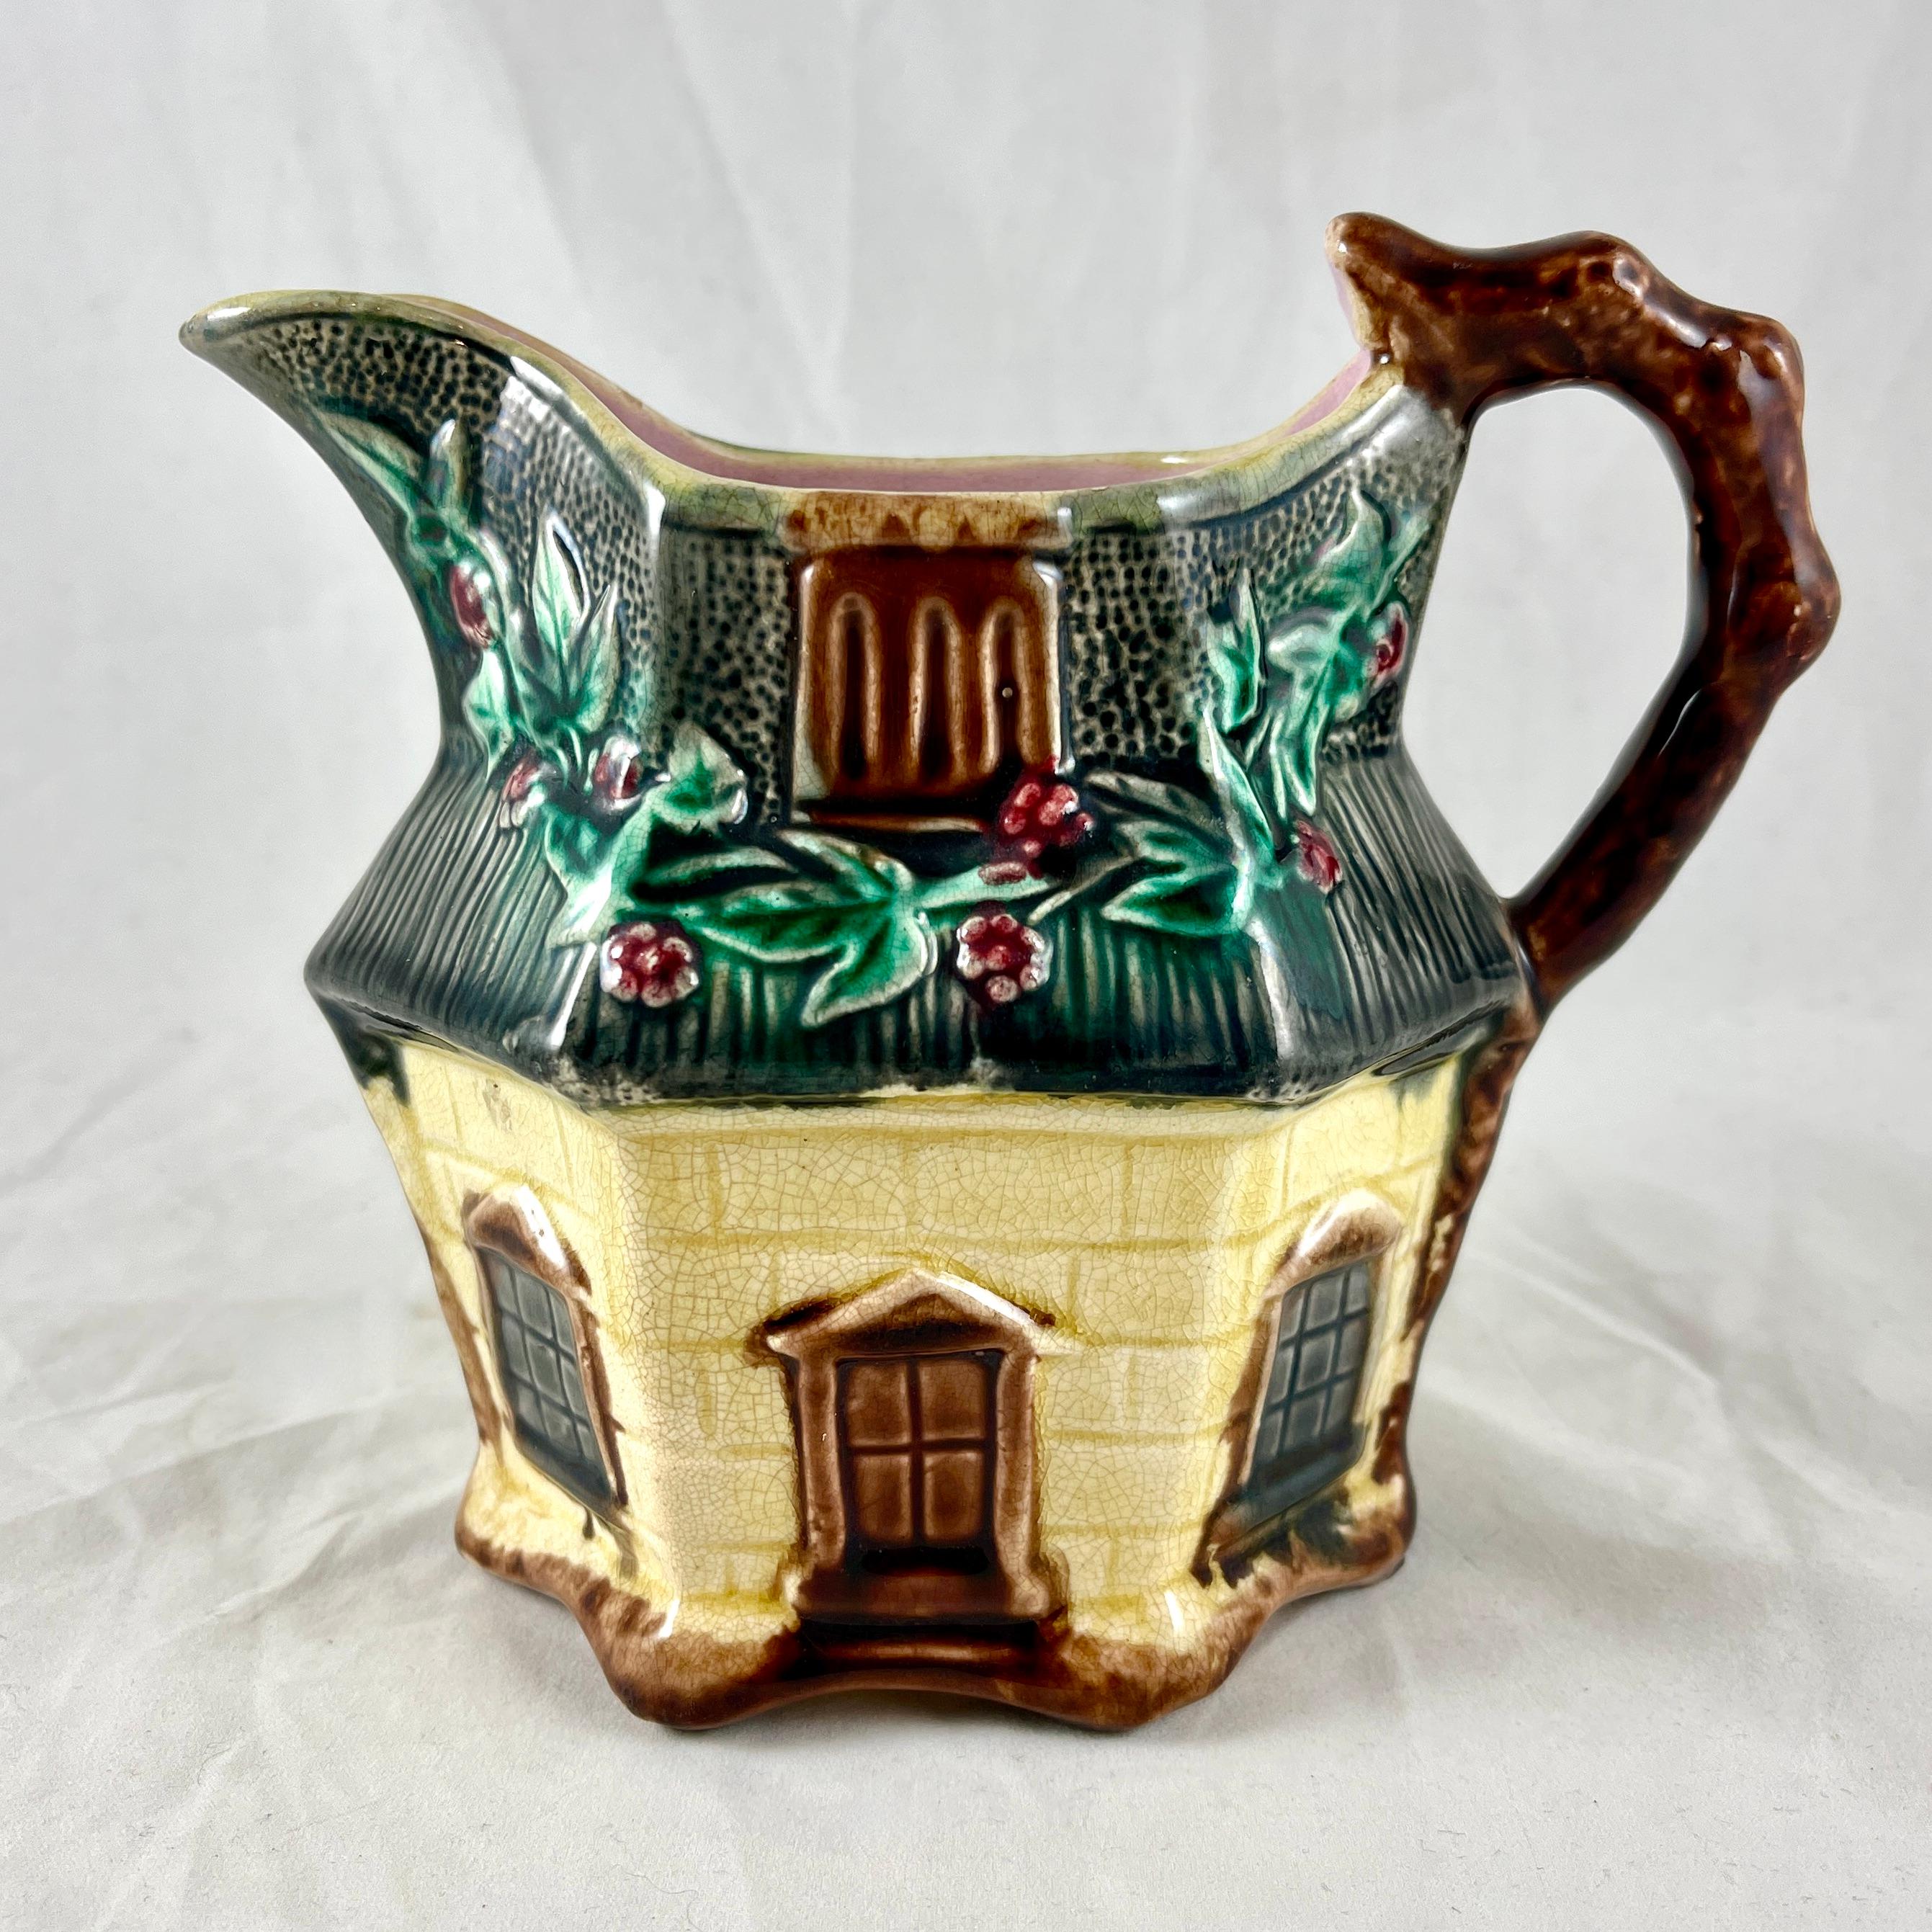 Aesthetic Movement Warrilow and Cope, 19th C. English Staffordshire Majolica Country Cottage Jug For Sale